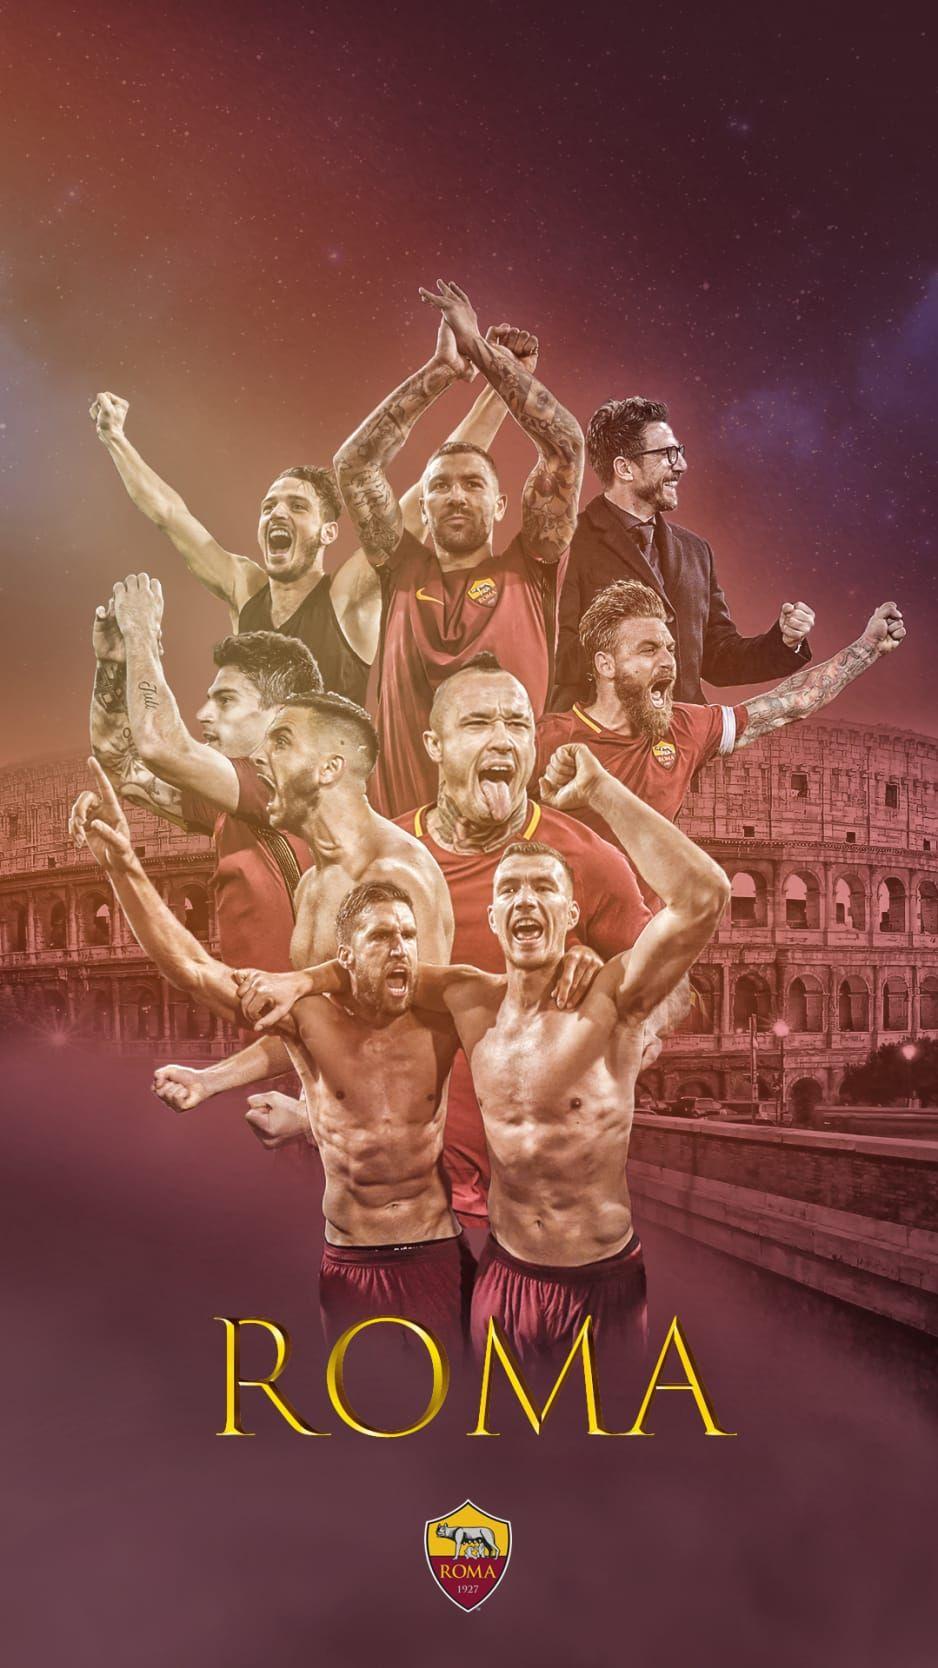 Every Friday we're making five new Roma wallpaper